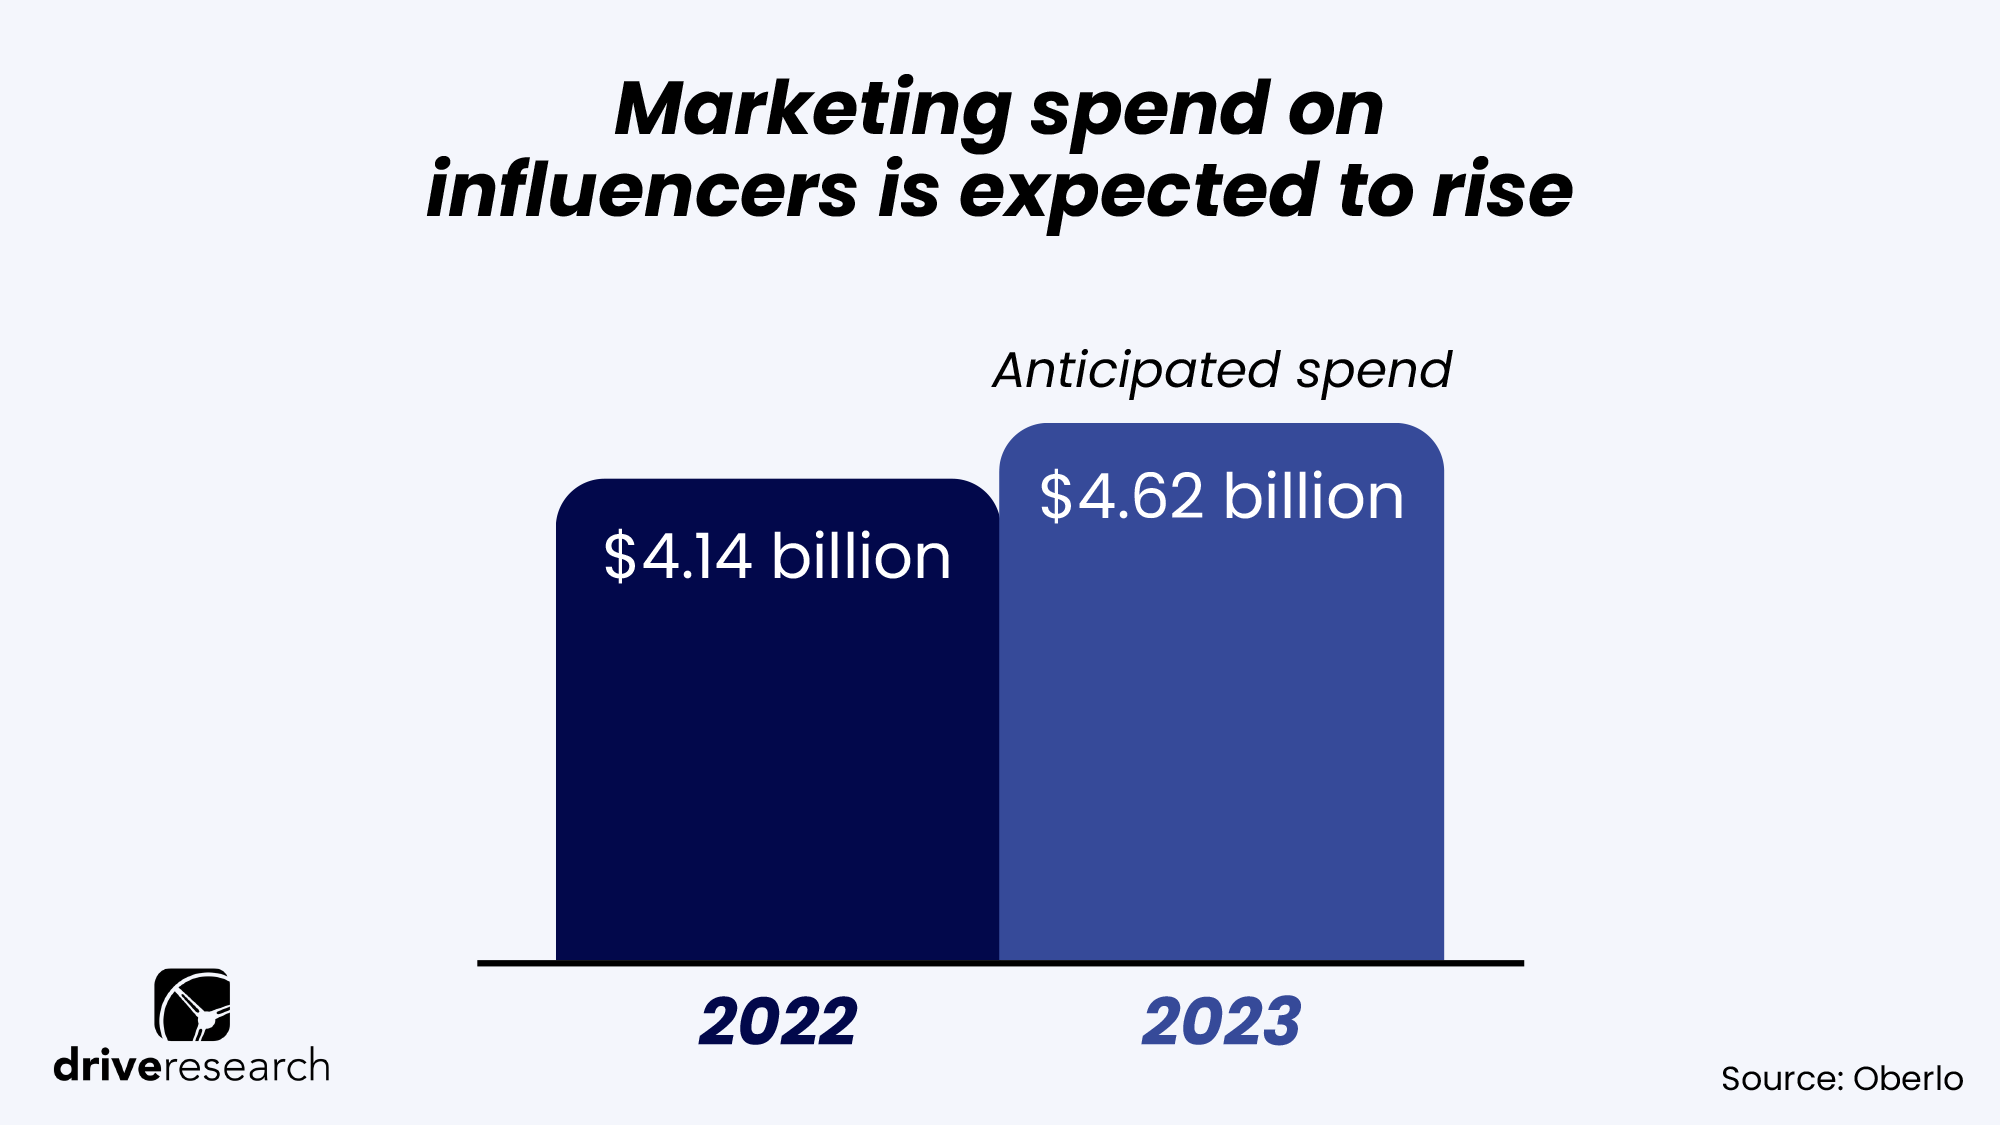 Marketing spend on influencers is expected to rise